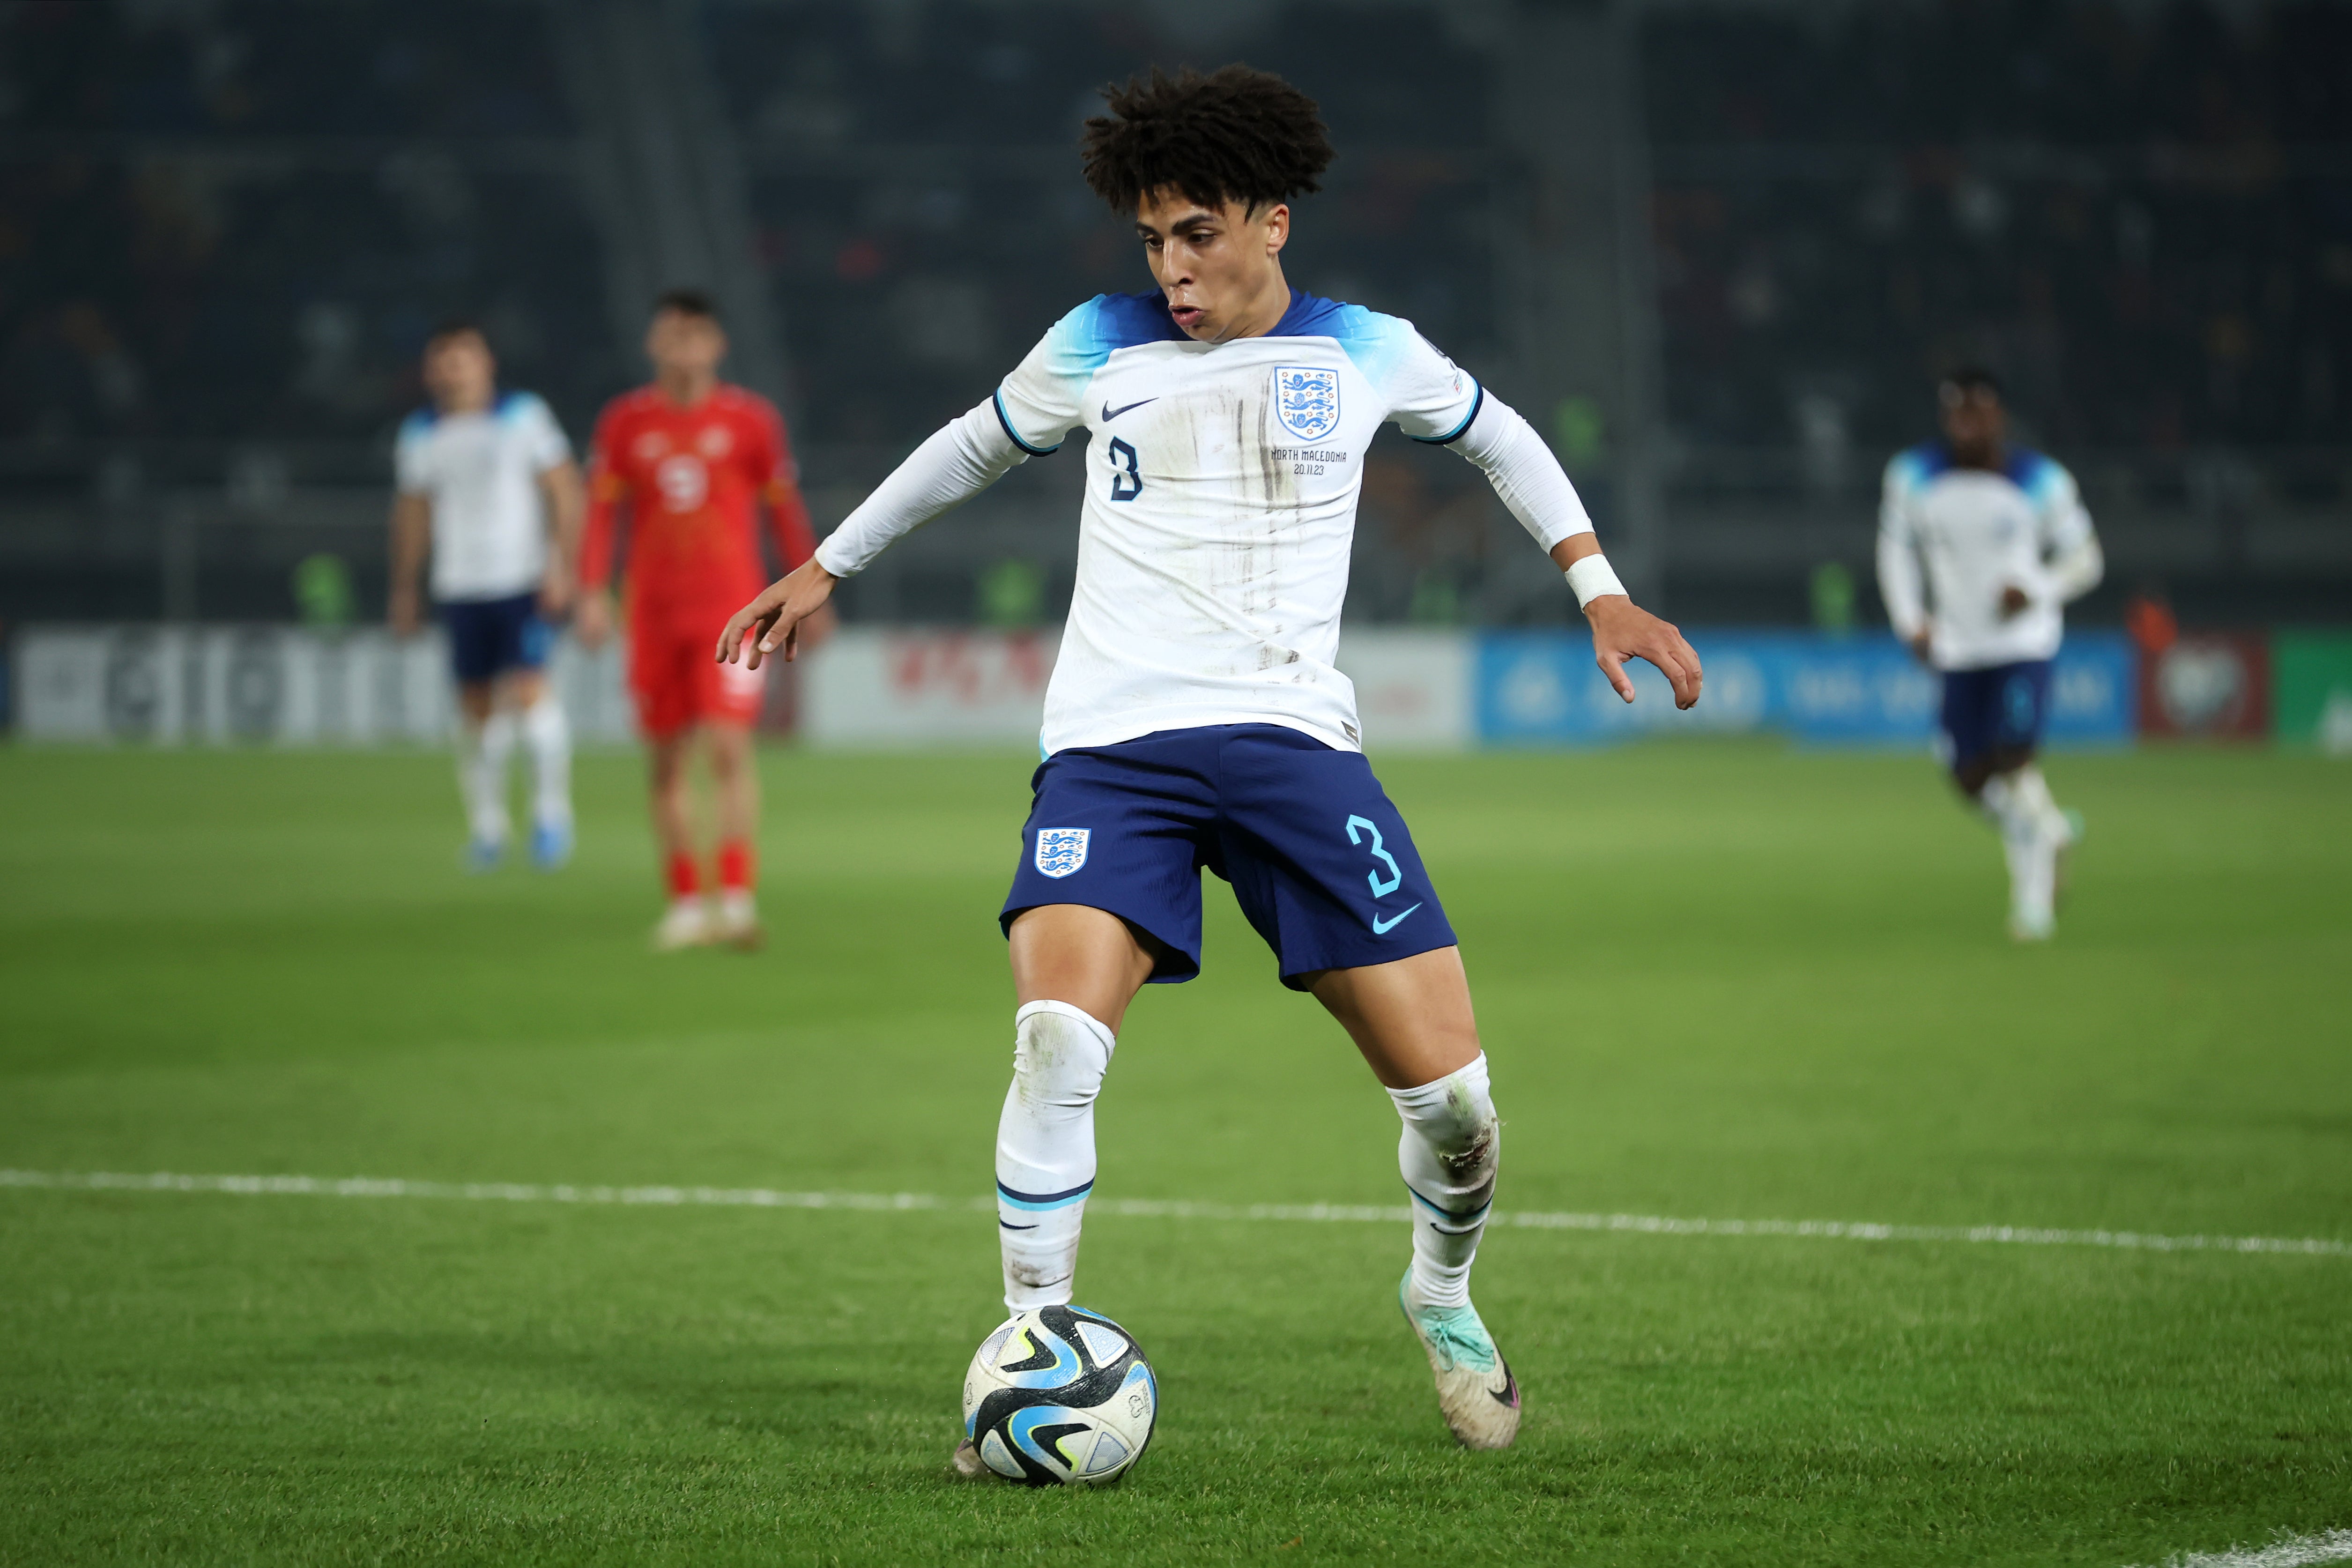 Rico Lewis epitomises the difficult decisions facing Gareth Southgate | The Independent